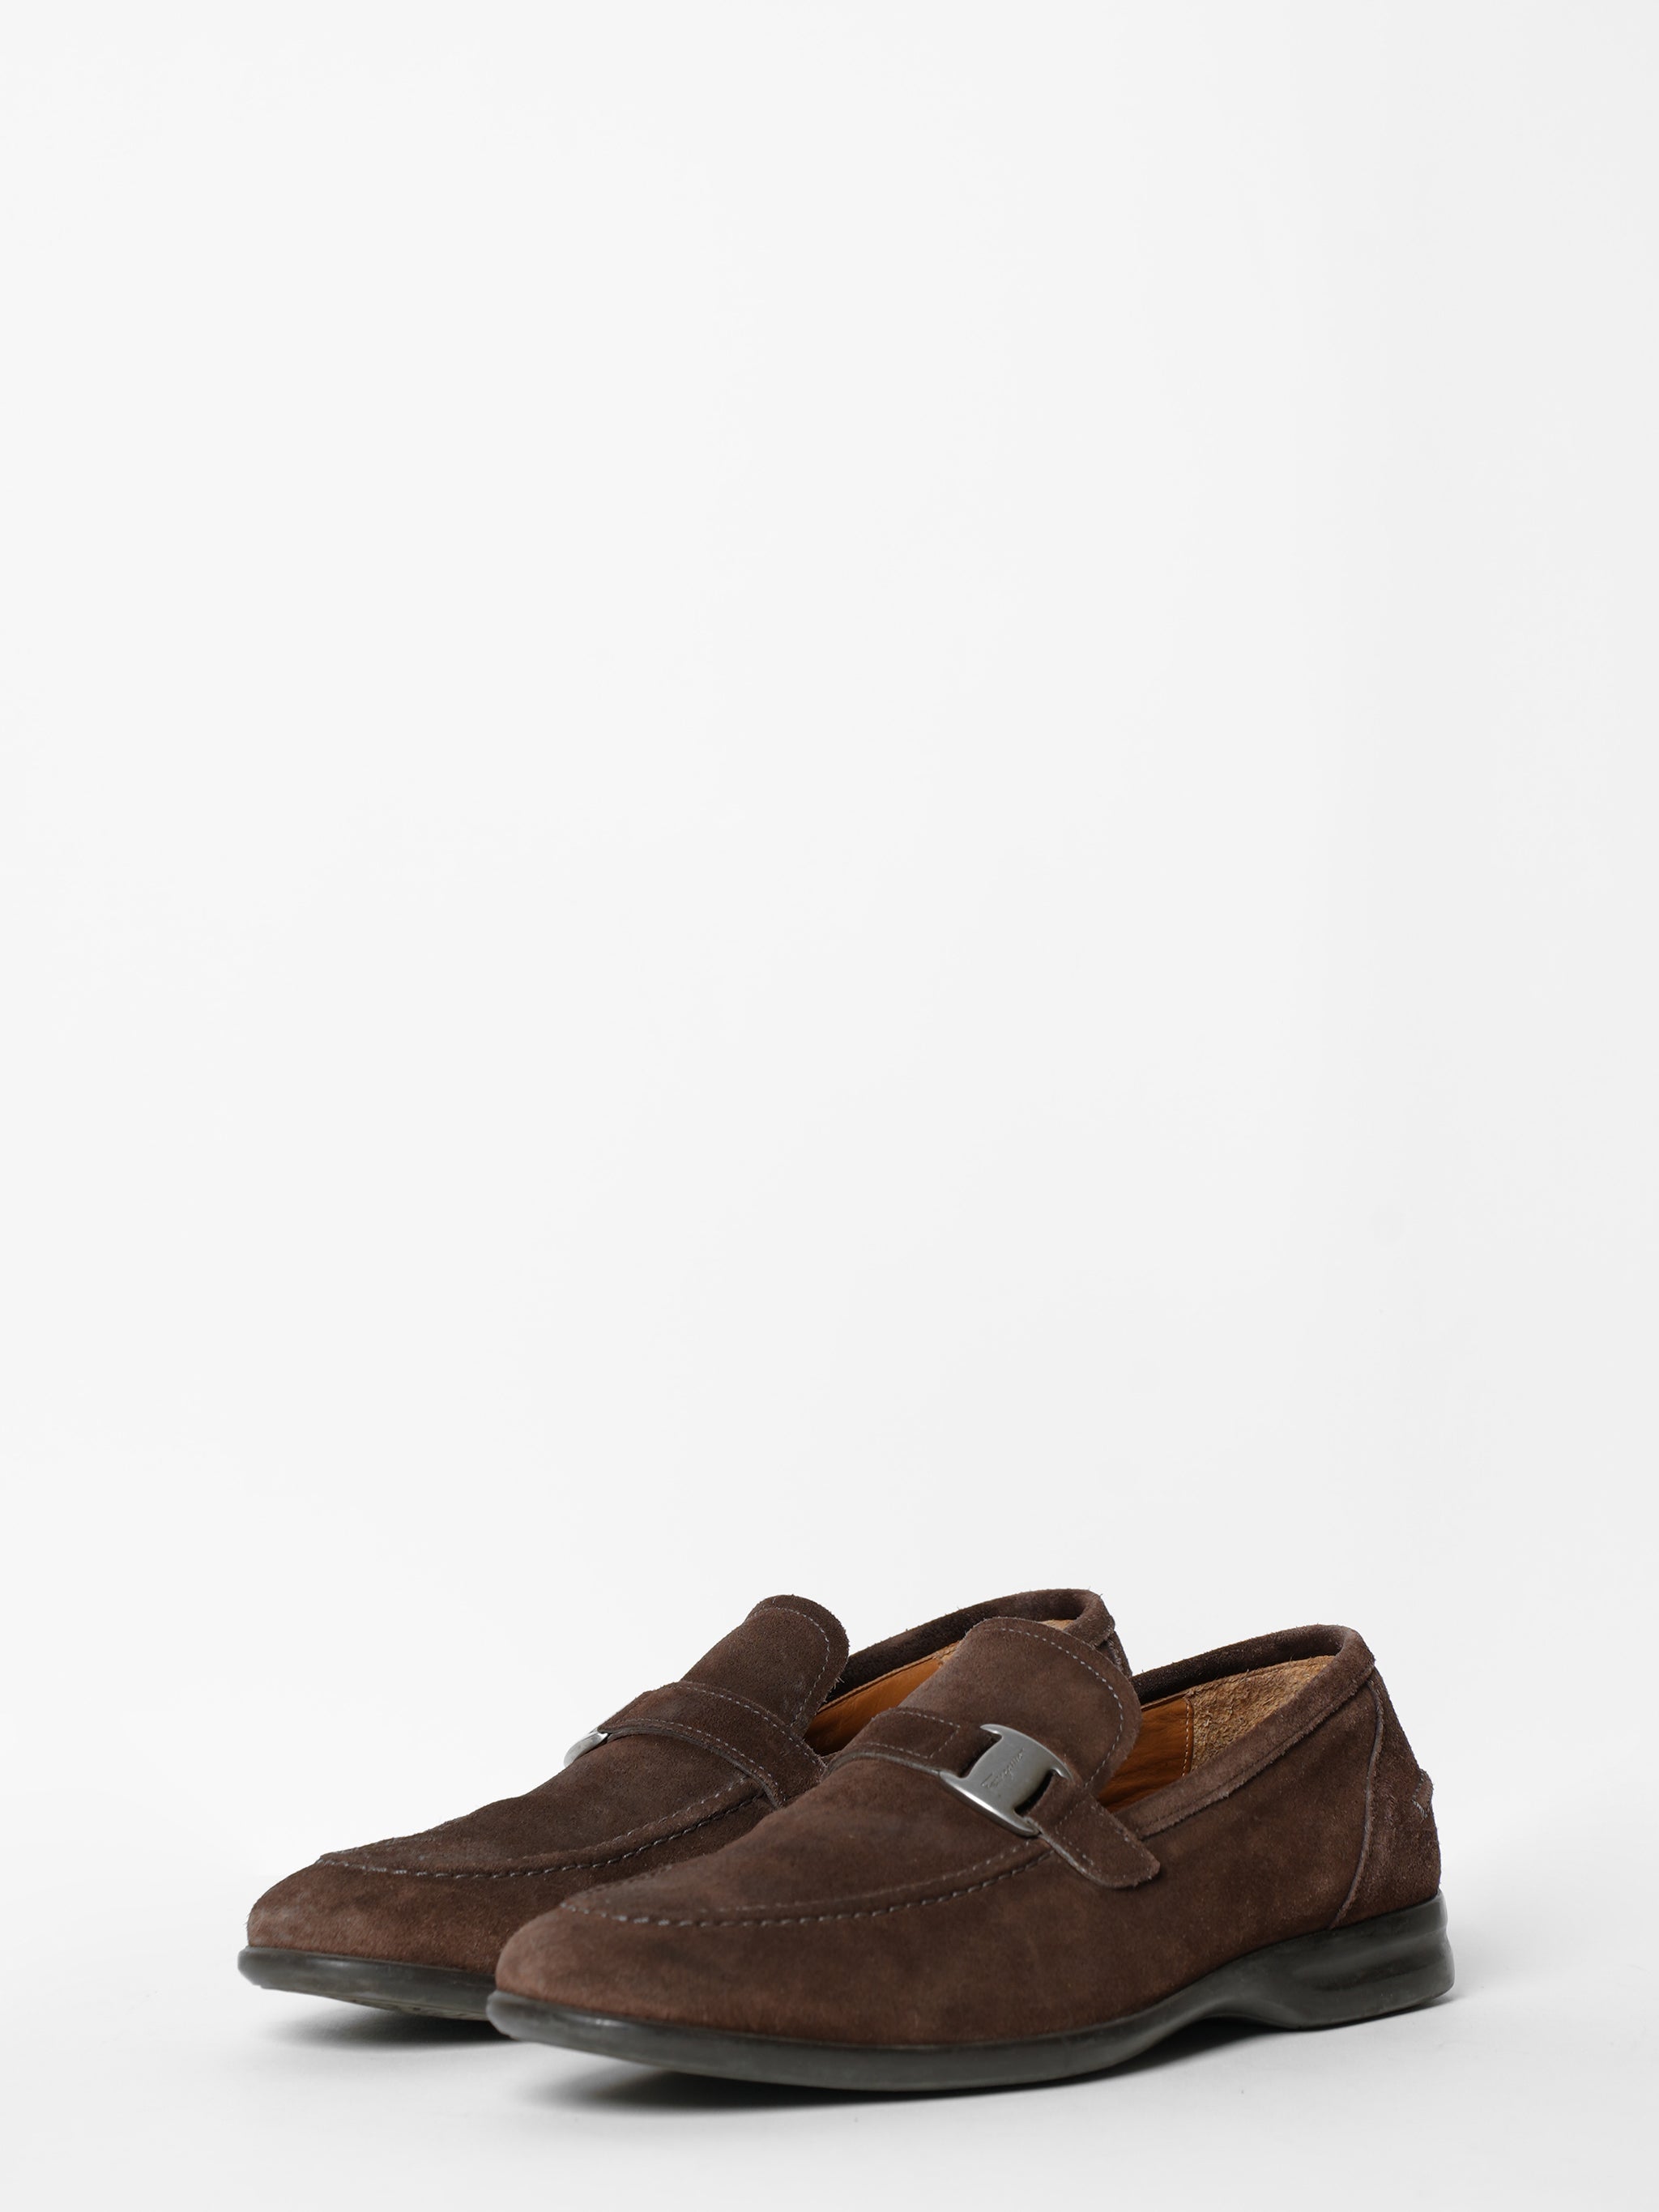 Ferragamo Brown Suede Leather Slip On Loafers